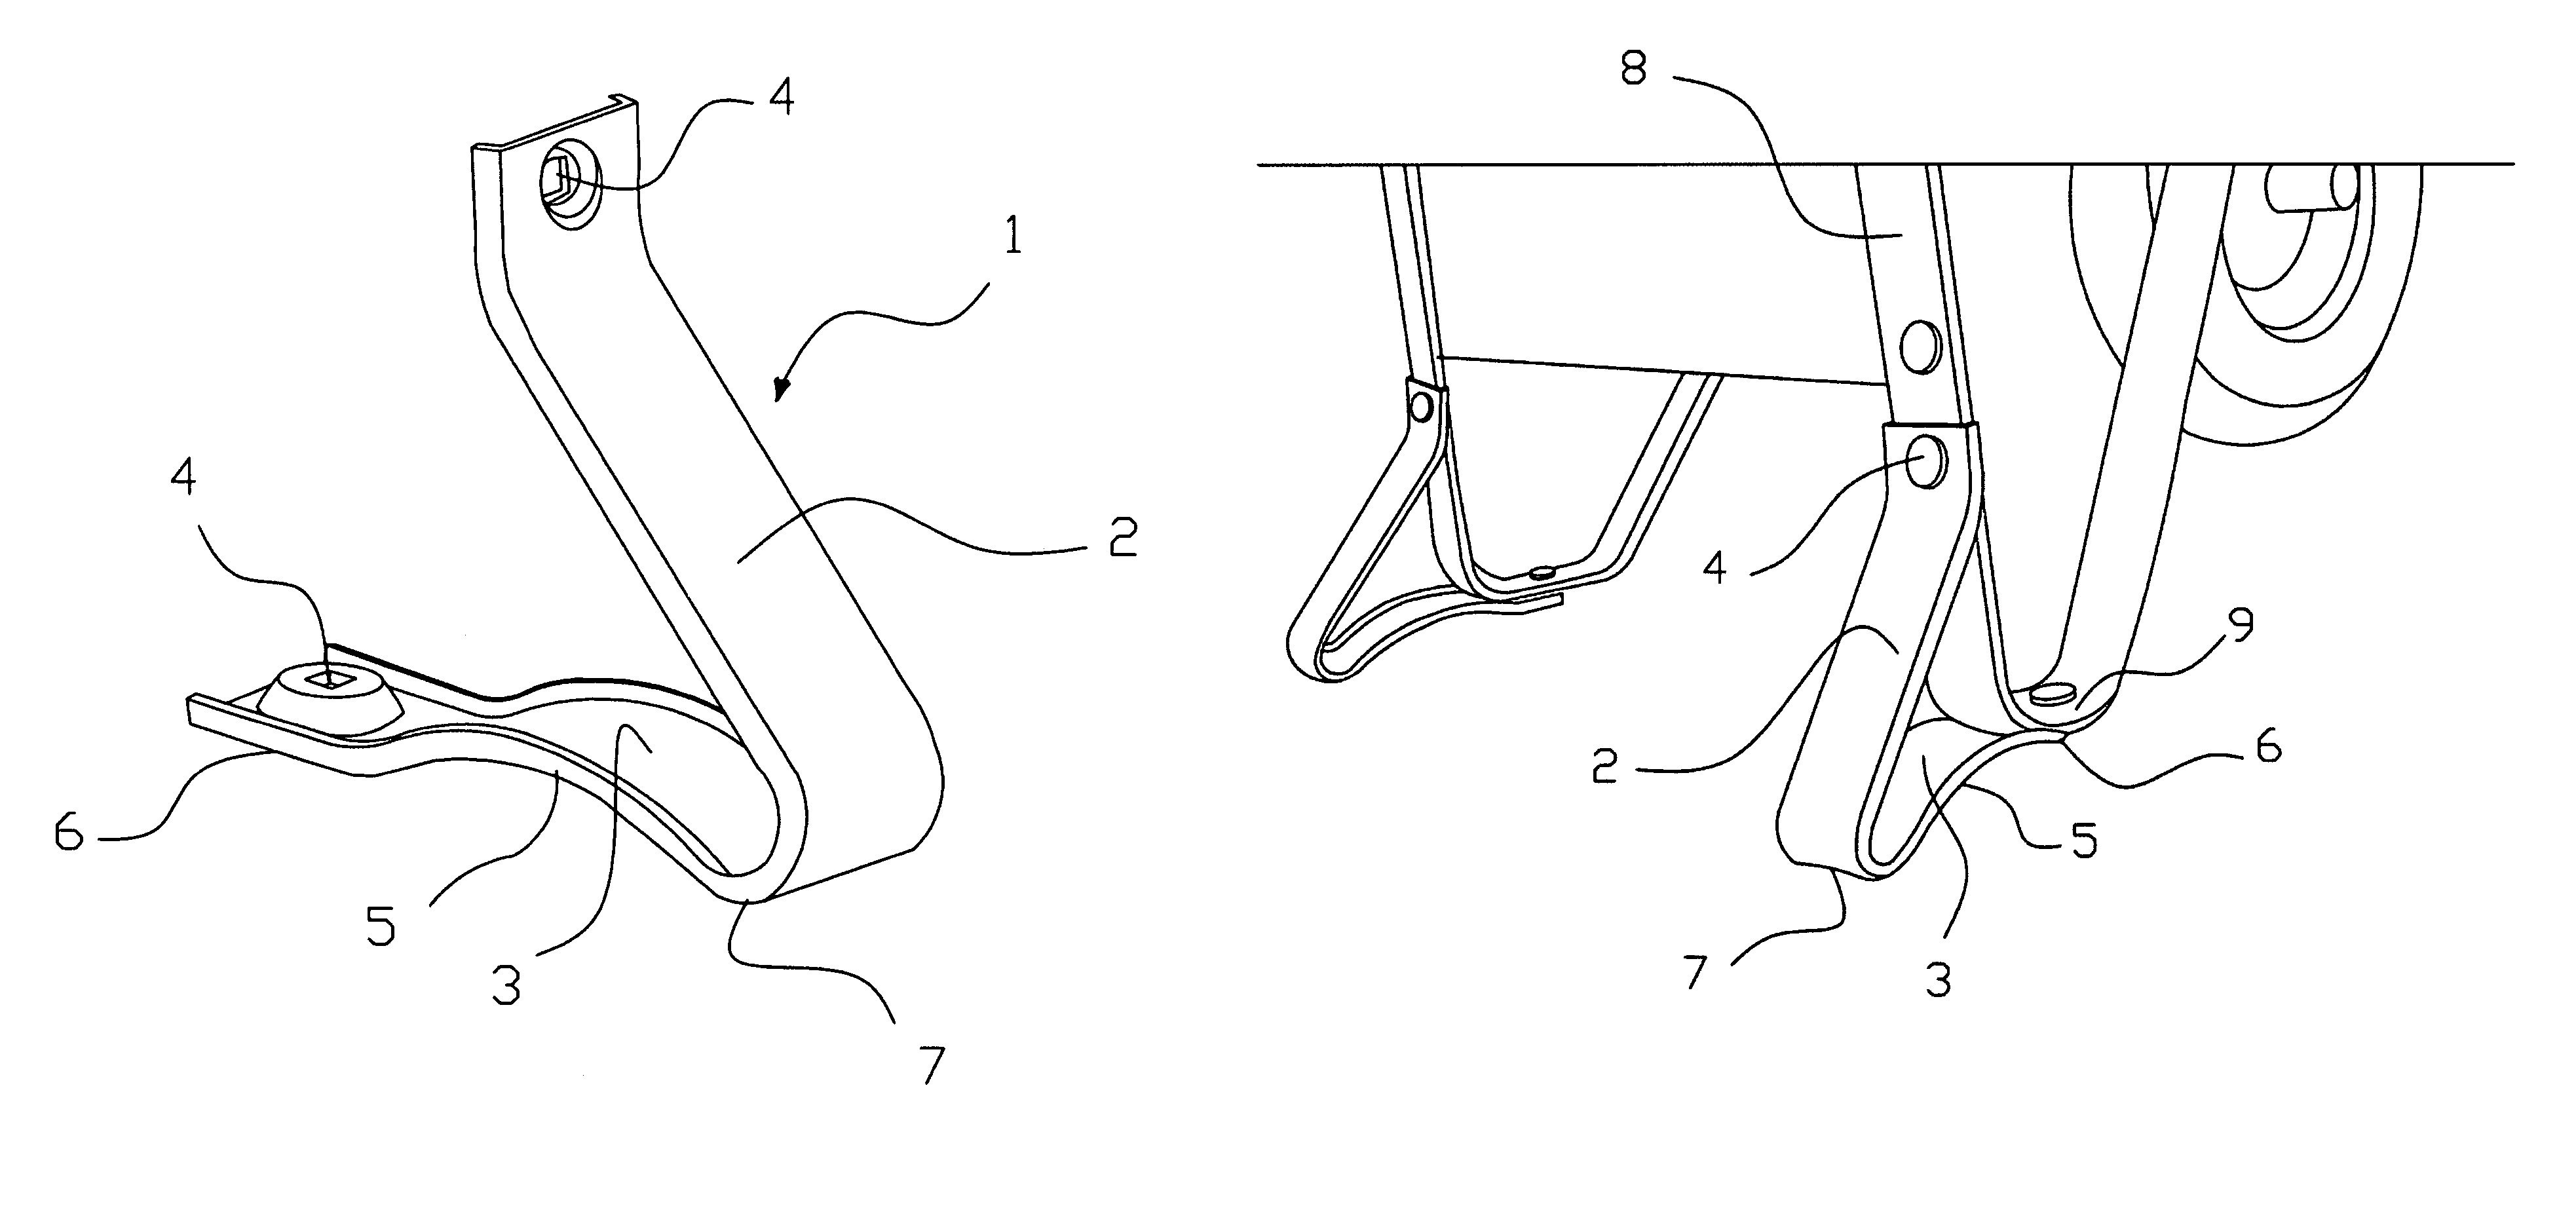 Wheelbarrow stabilizer with improved load distribution